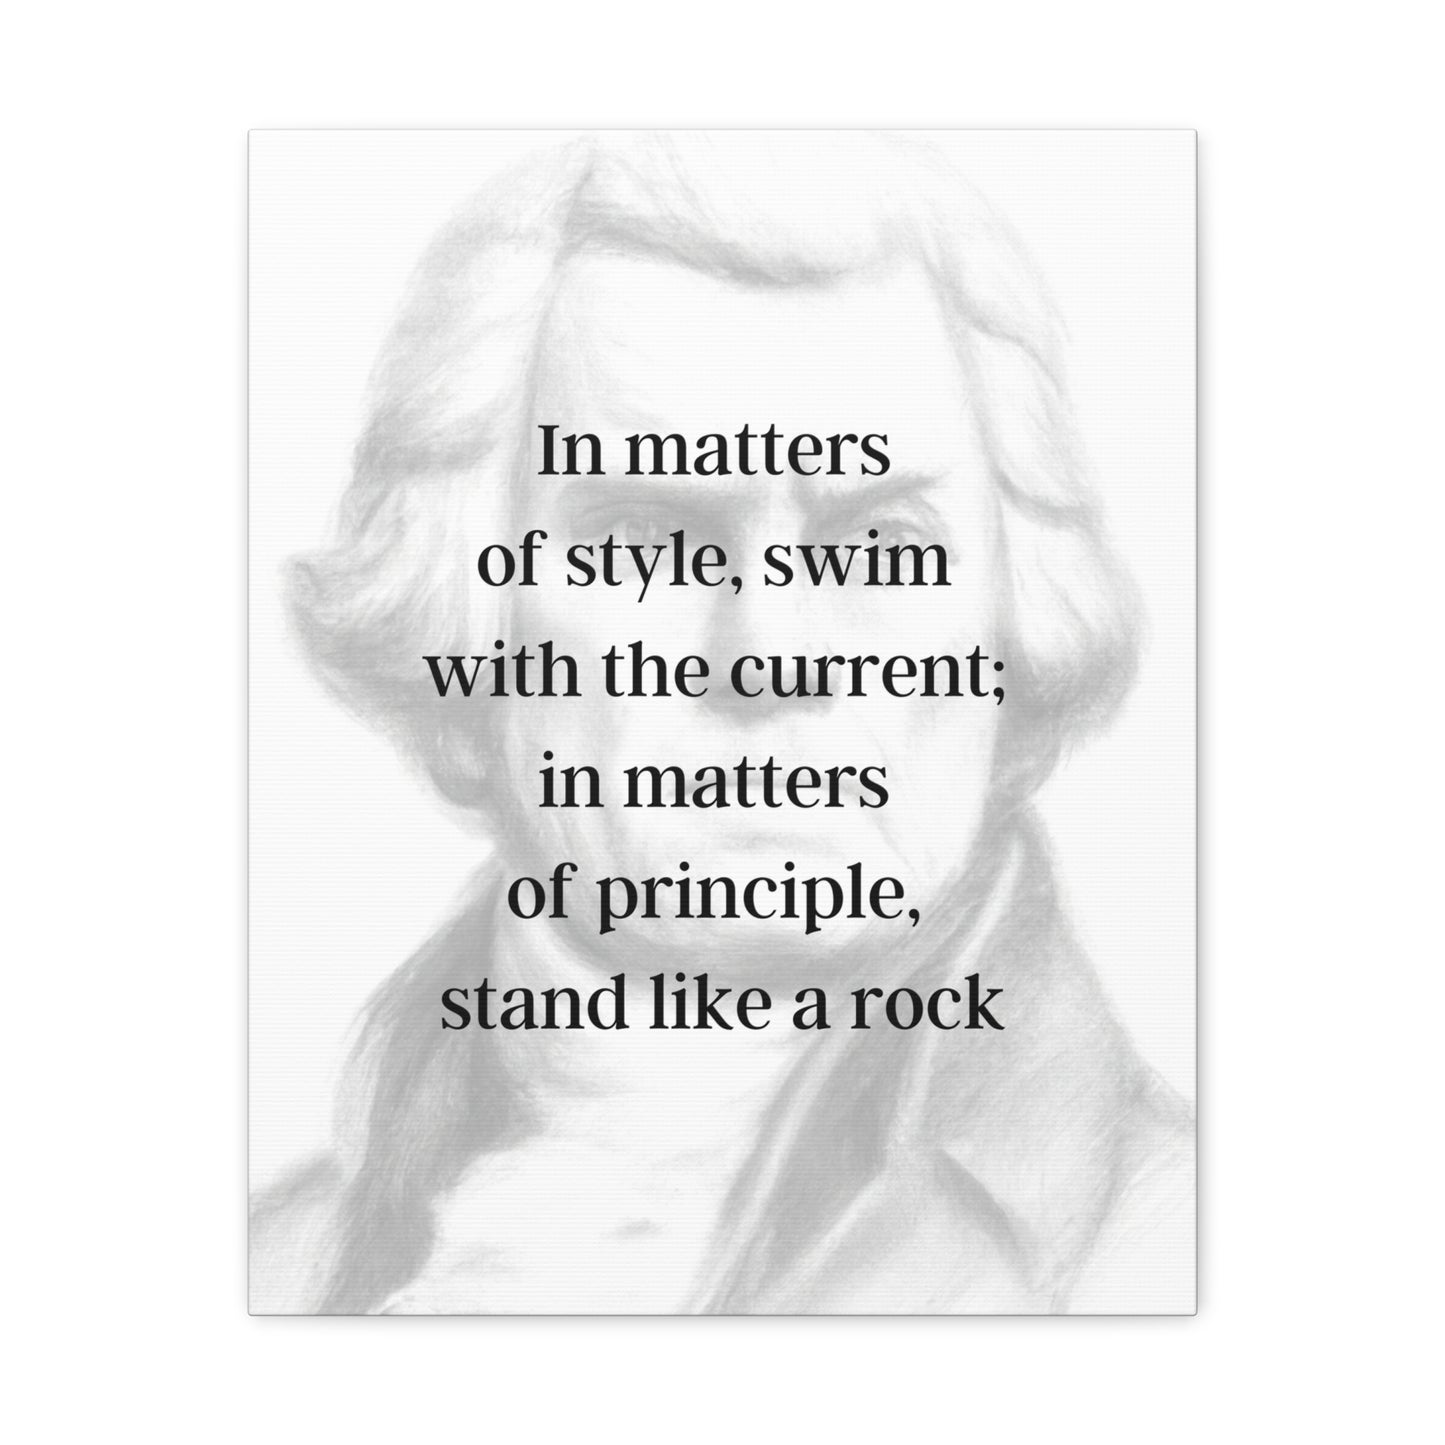 Thomas Jefferson Quote 2, Canvas Art, Light Print, 3rd President of the United States, American Patriots, AI Art, Political Art, Canvas Prints, Presidential Portraits, Presidential Quotes, Inspirational Quotes